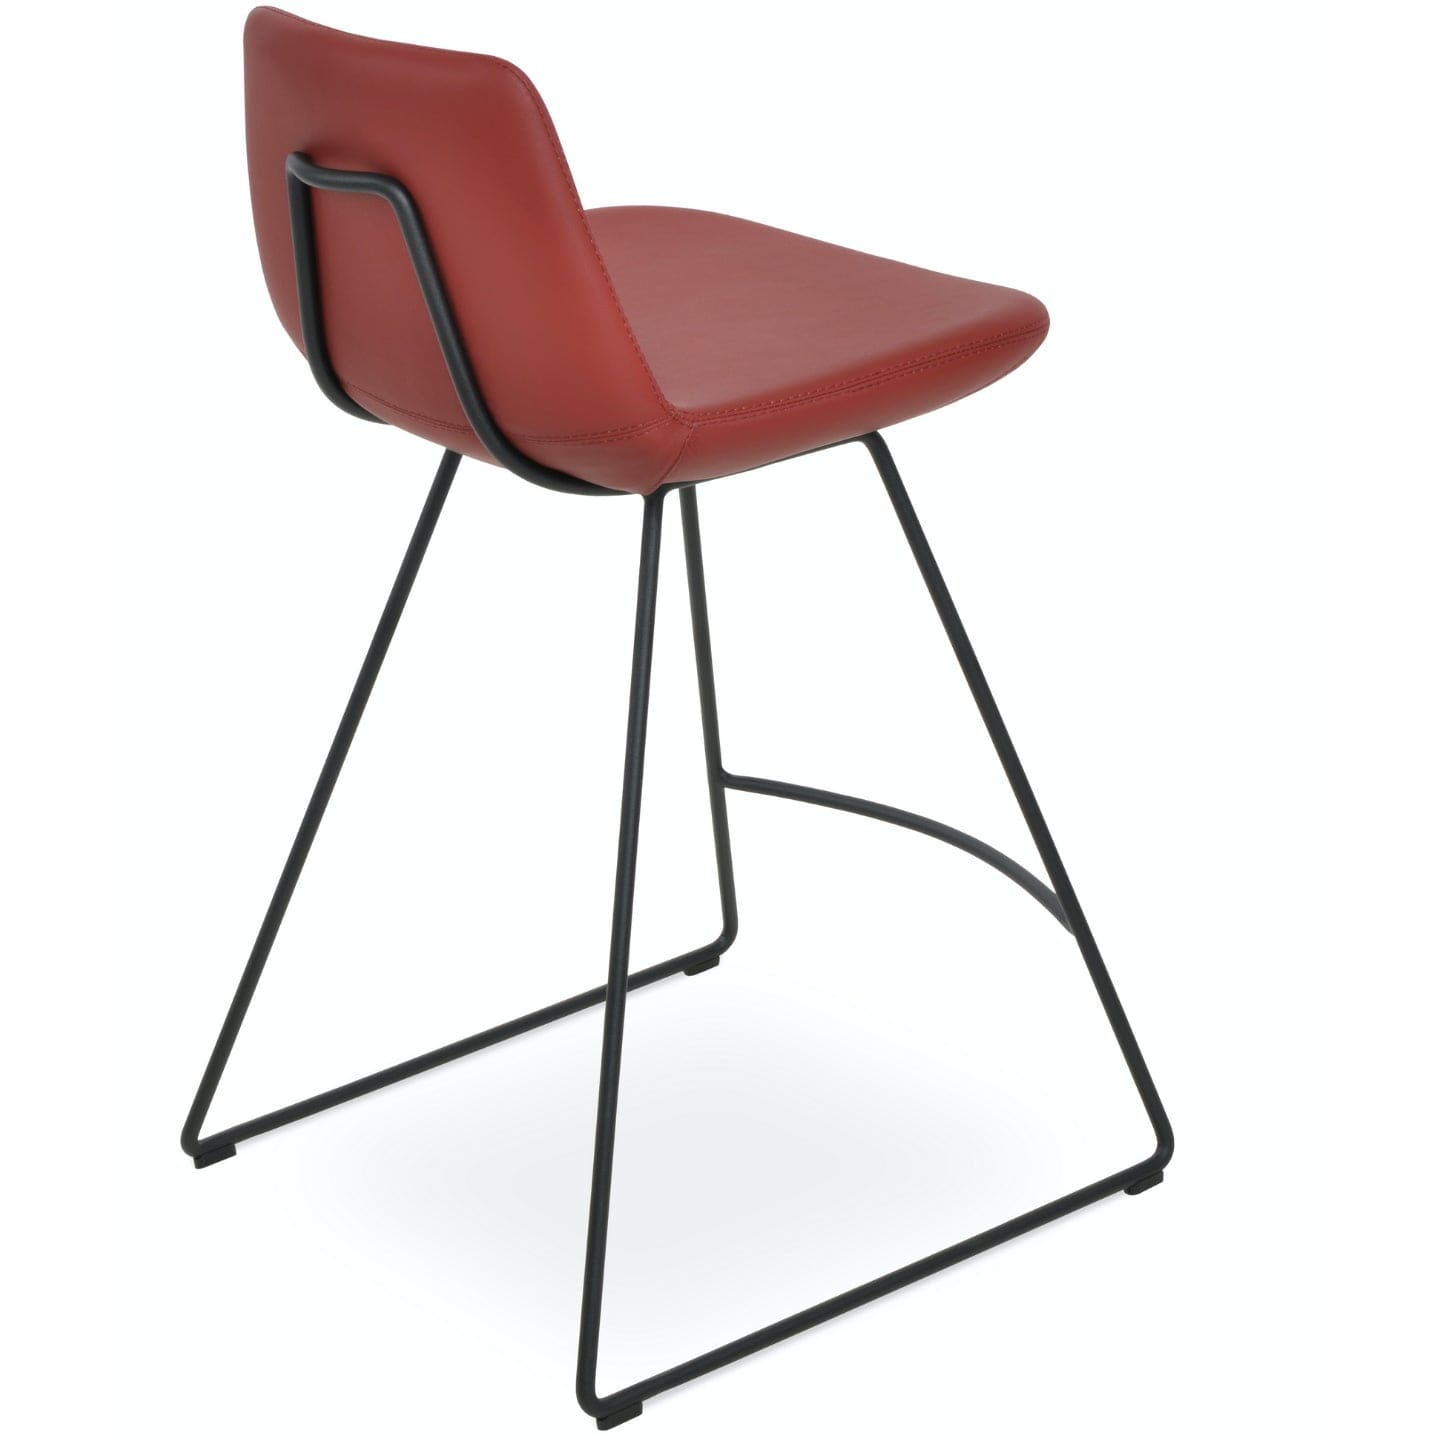 Soho Concept pera-wire-handle-back-black-metal-wire-base-faux-leather-seat-kitchen-stool-in-dark-red